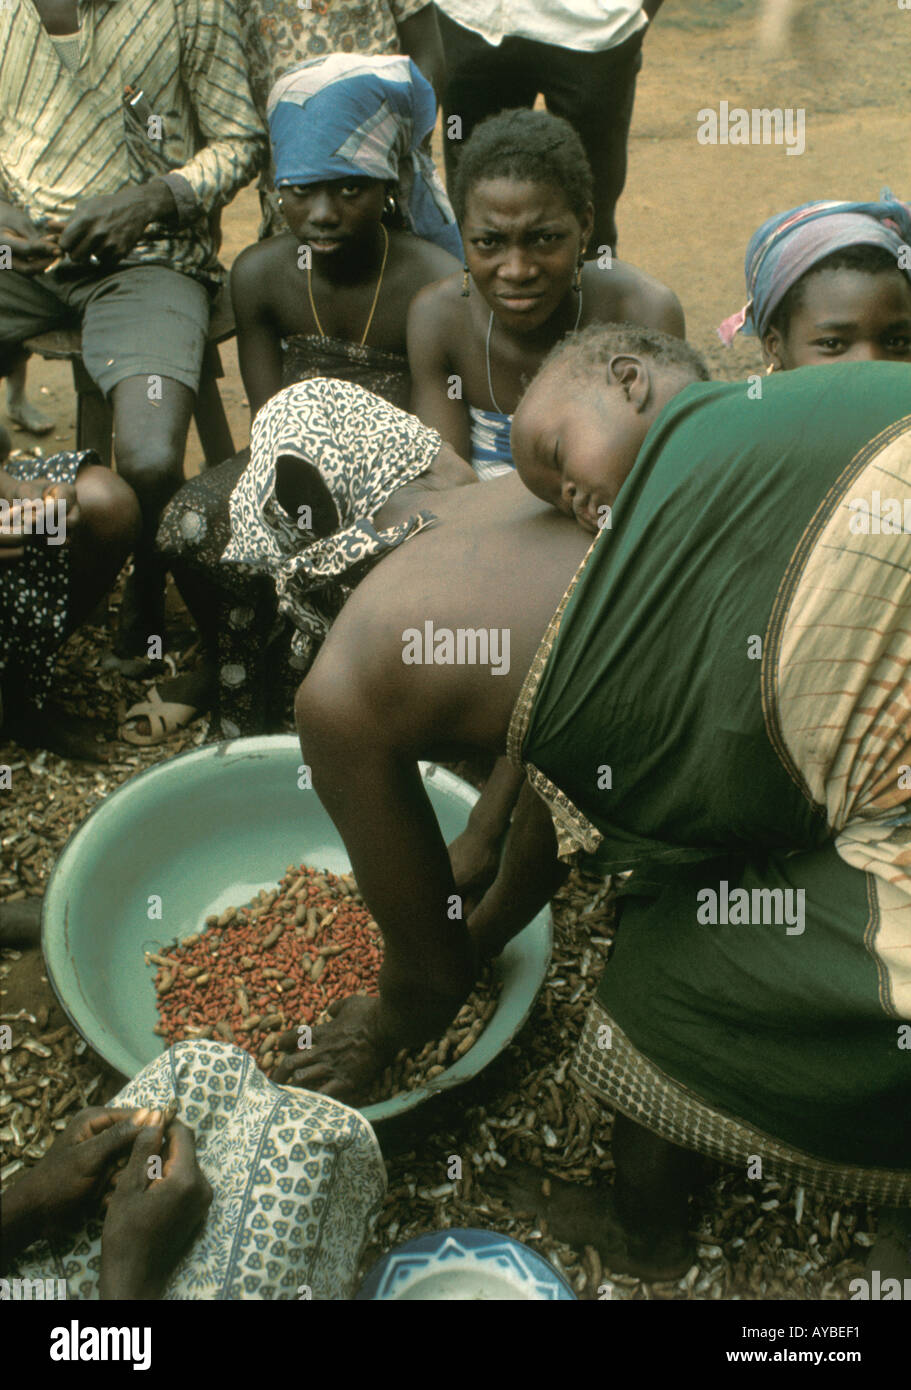 West Africa Liberia Kpelle tribe group of villagers shelling peanuts woman carries baby strapped on back Stock Photo